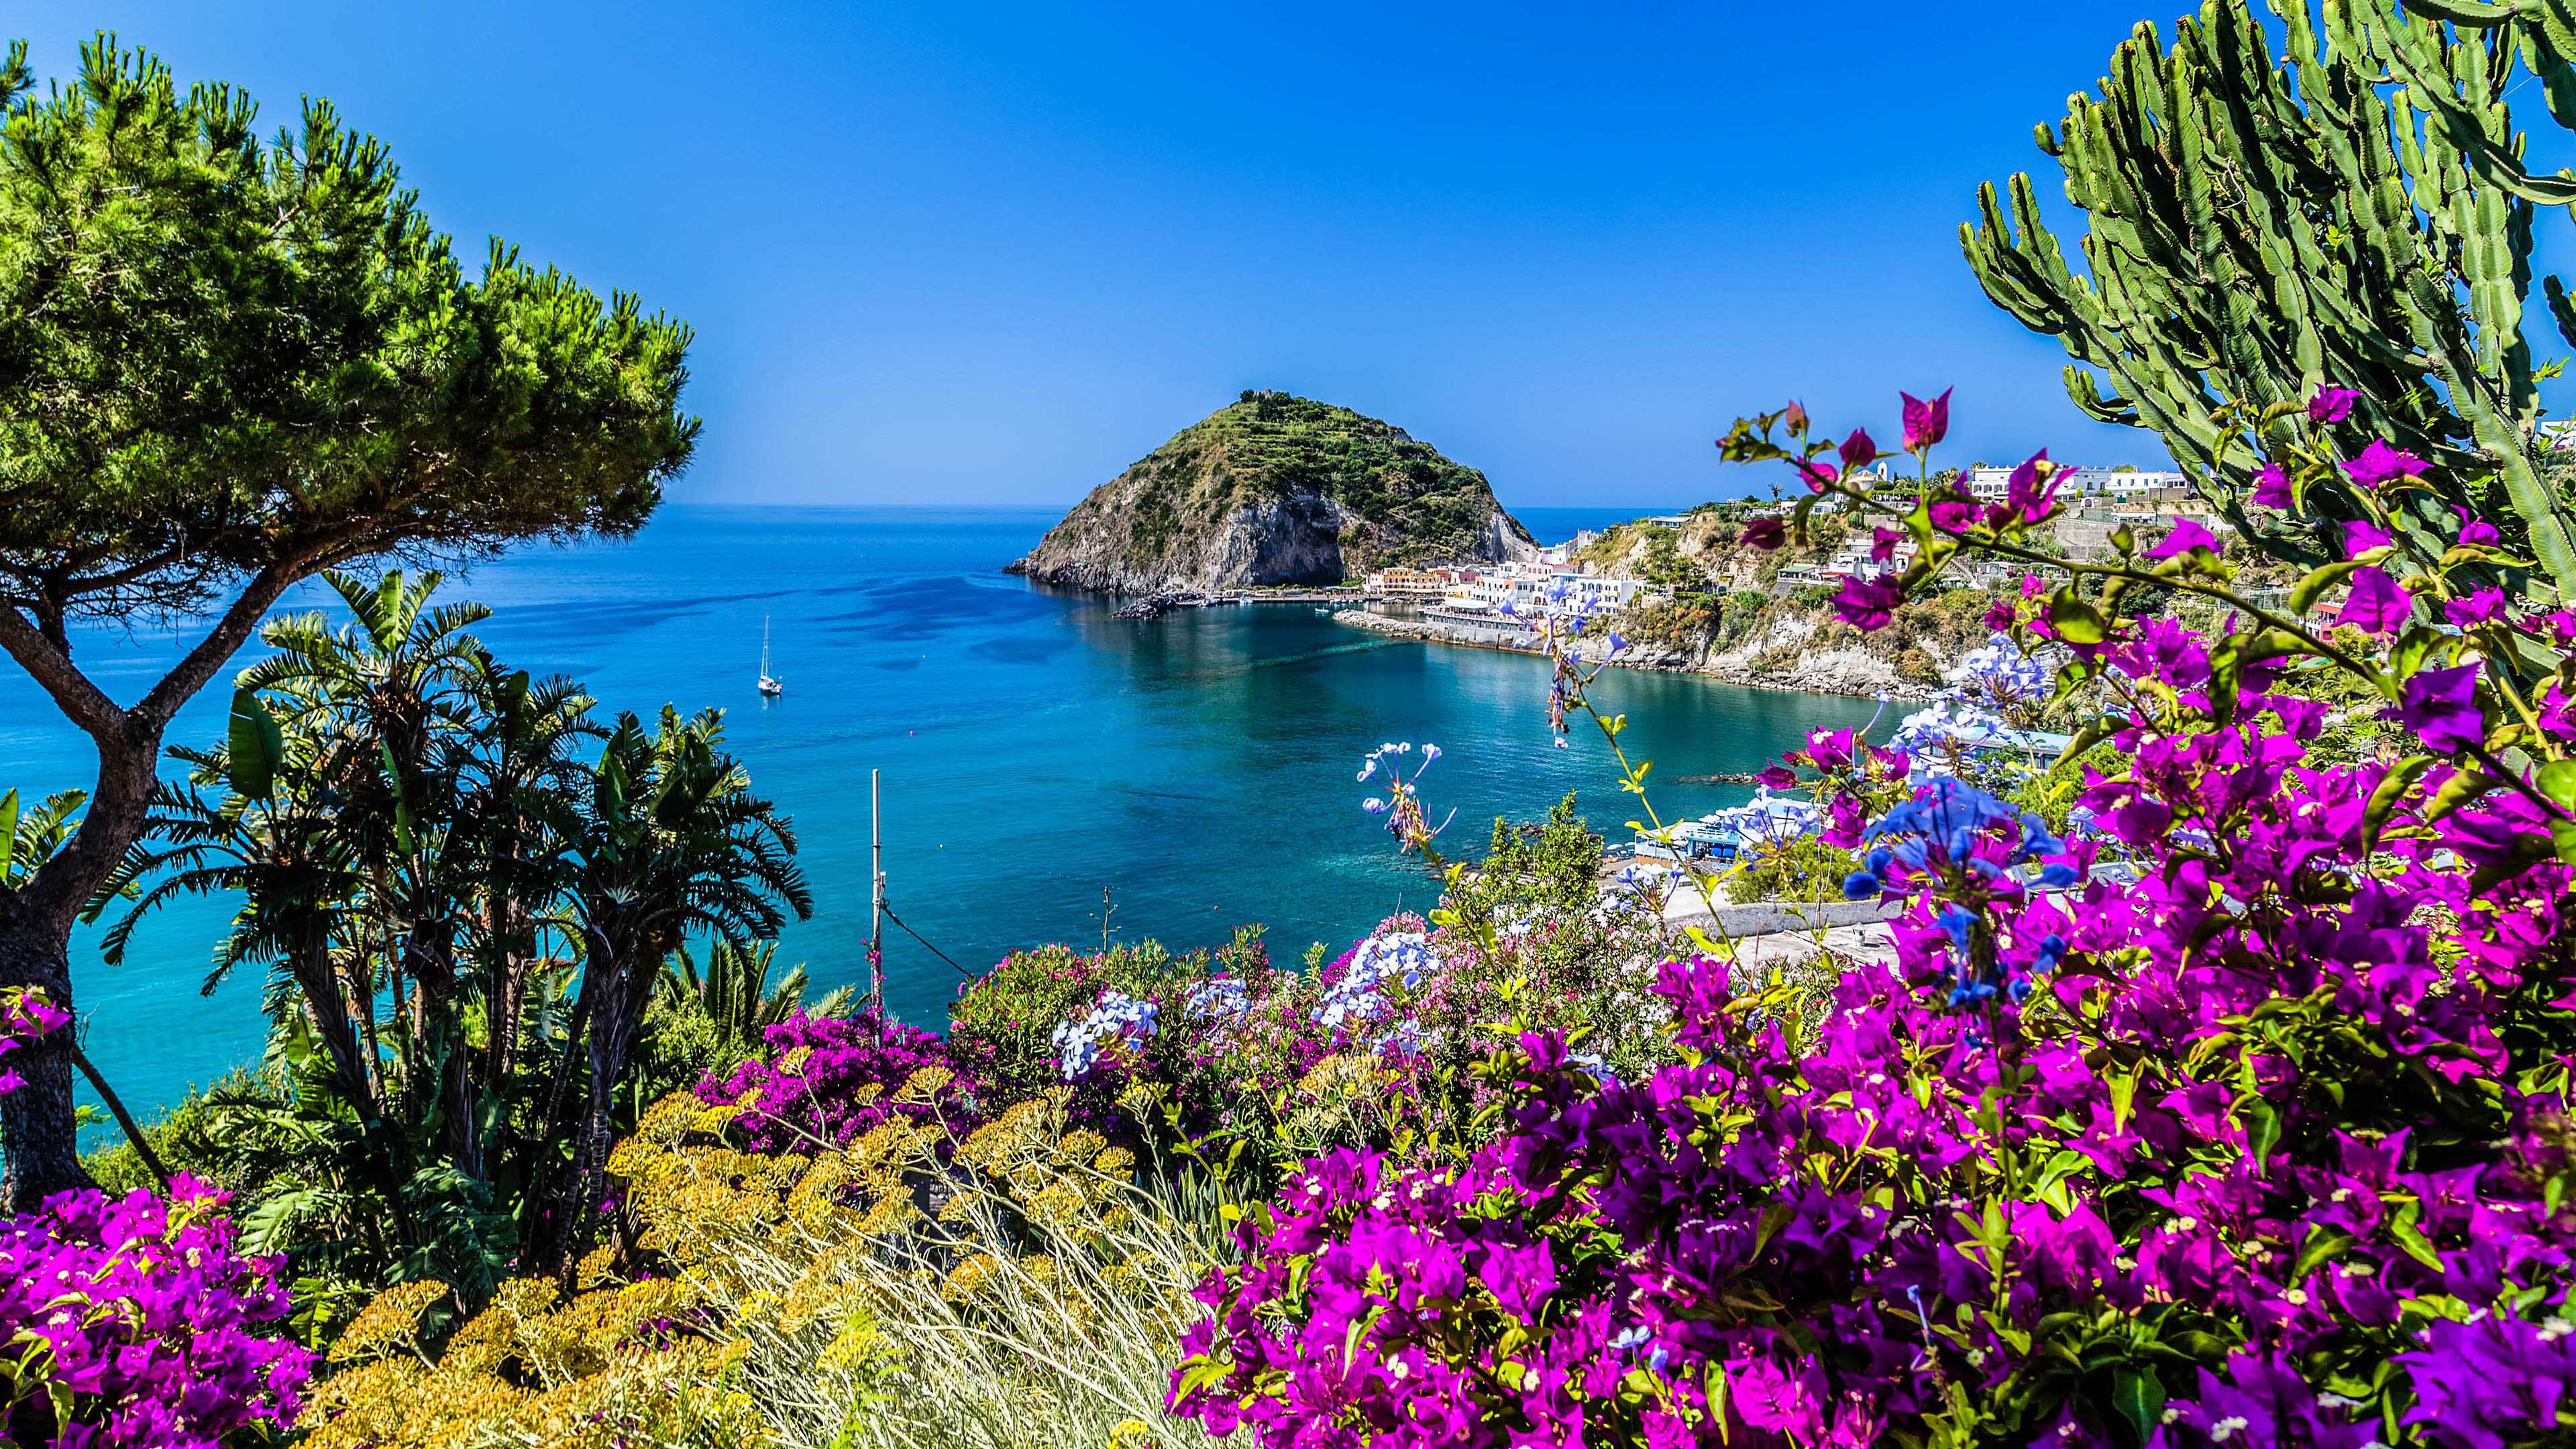 Ischia Is A Volcanic Island In The Gulf Of Naples Italy The Beach